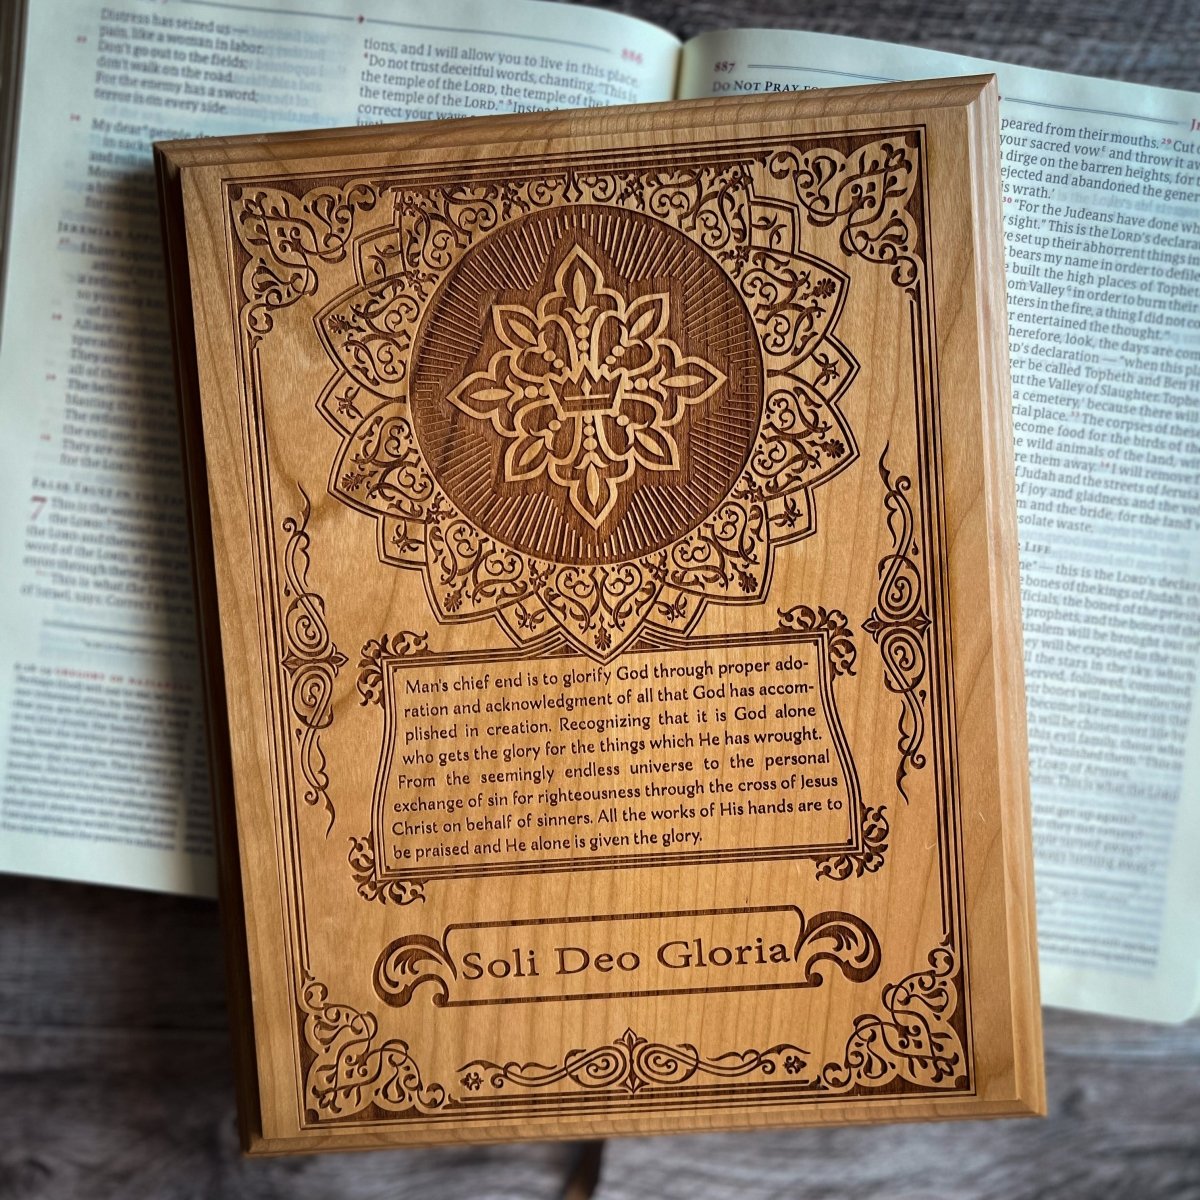 Engravedwood - Soli Deo Gloria - Engraved Wood Art - The Reformed Sage - #reformed# - #reformed_gifts# - #christian_gifts#